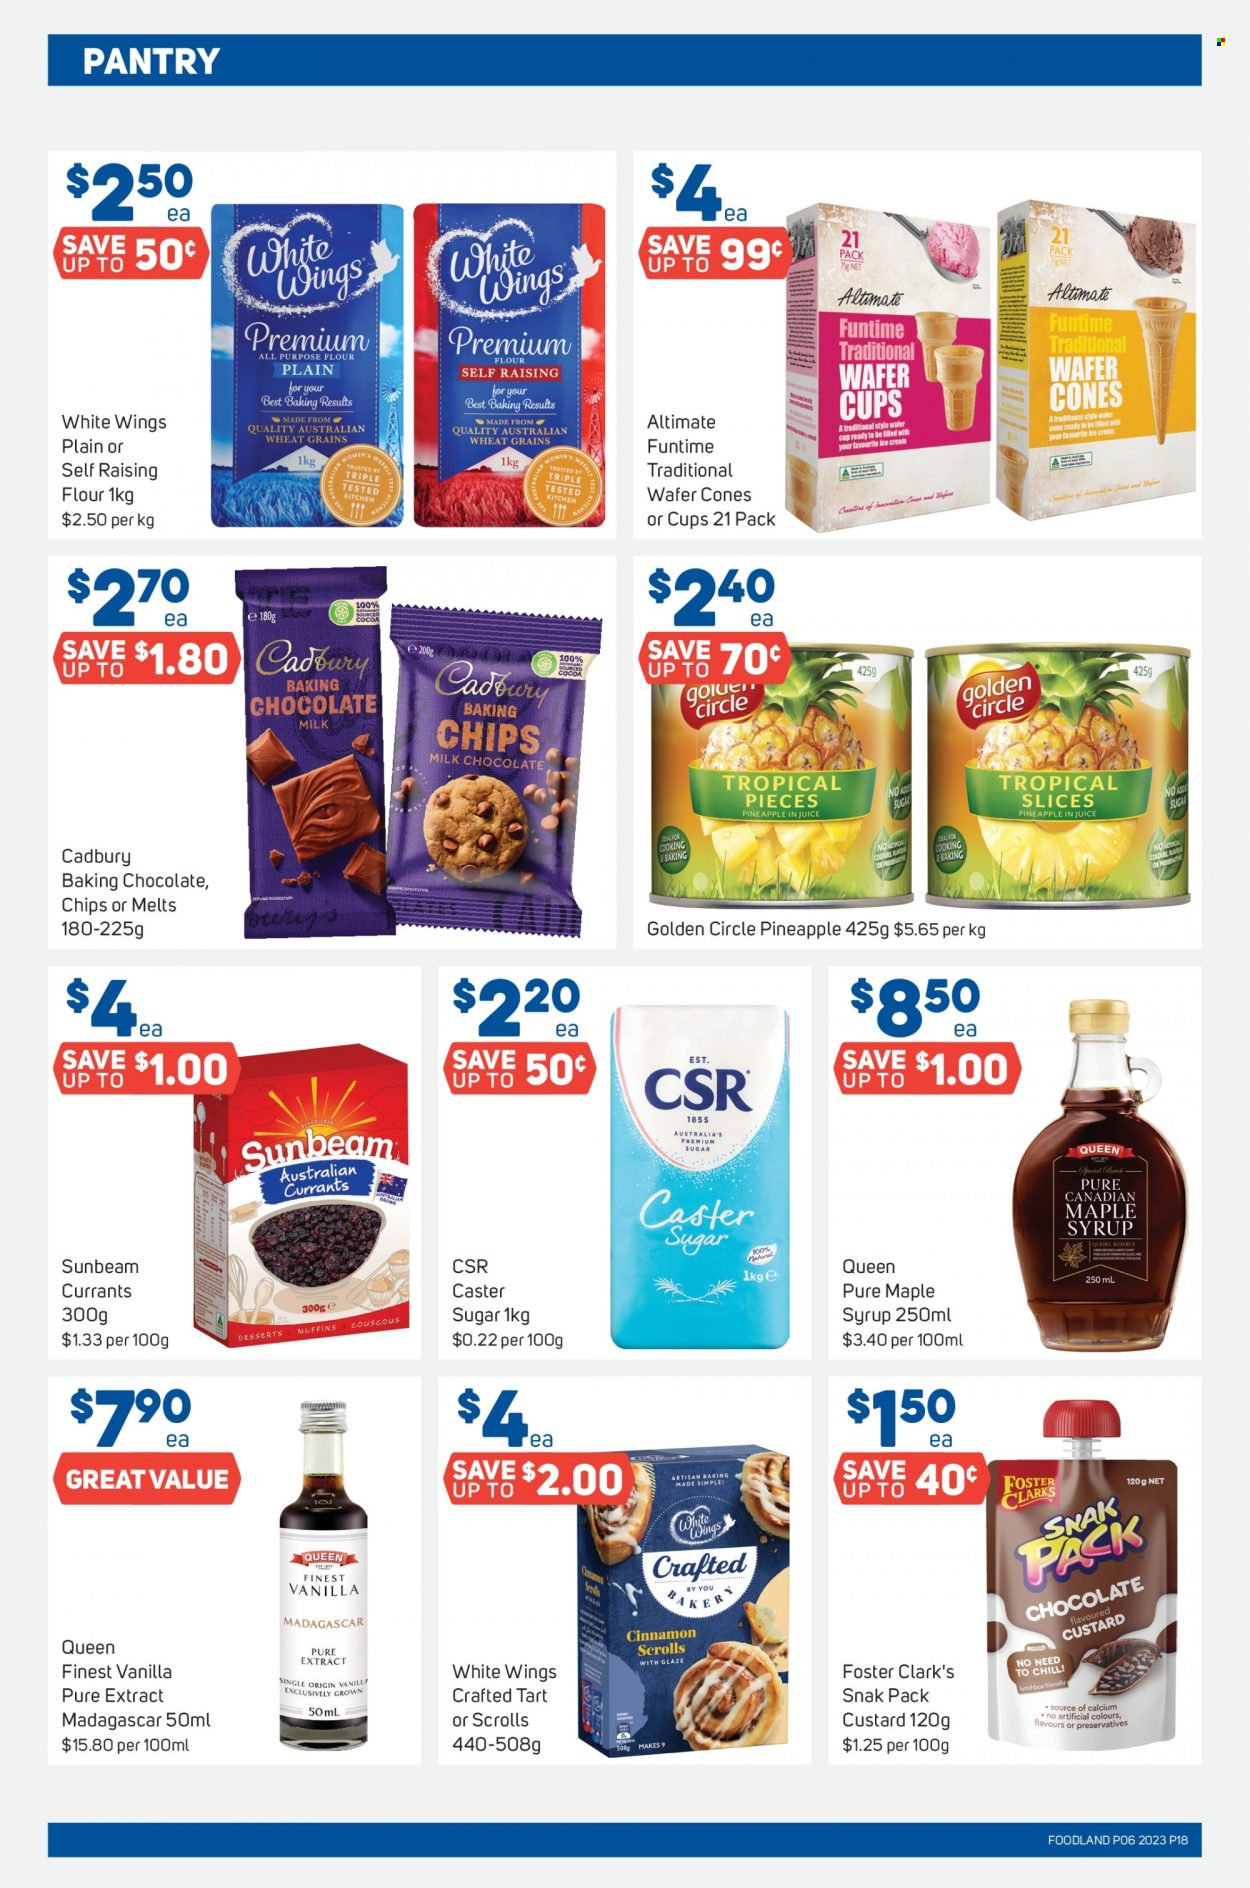 thumbnail - Foodland Catalogue - 8 Feb 2023 - 14 Feb 2023 - Sales products - tart, muffin, White Wings, pineapple, custard, ice cream, milk chocolate, wafers, Cadbury, all purpose flour, flour, sugar, caster sugar, baking chips, couscous, cinnamon, maple syrup, syrup, currants, juice, Sunbeam. Page 18.